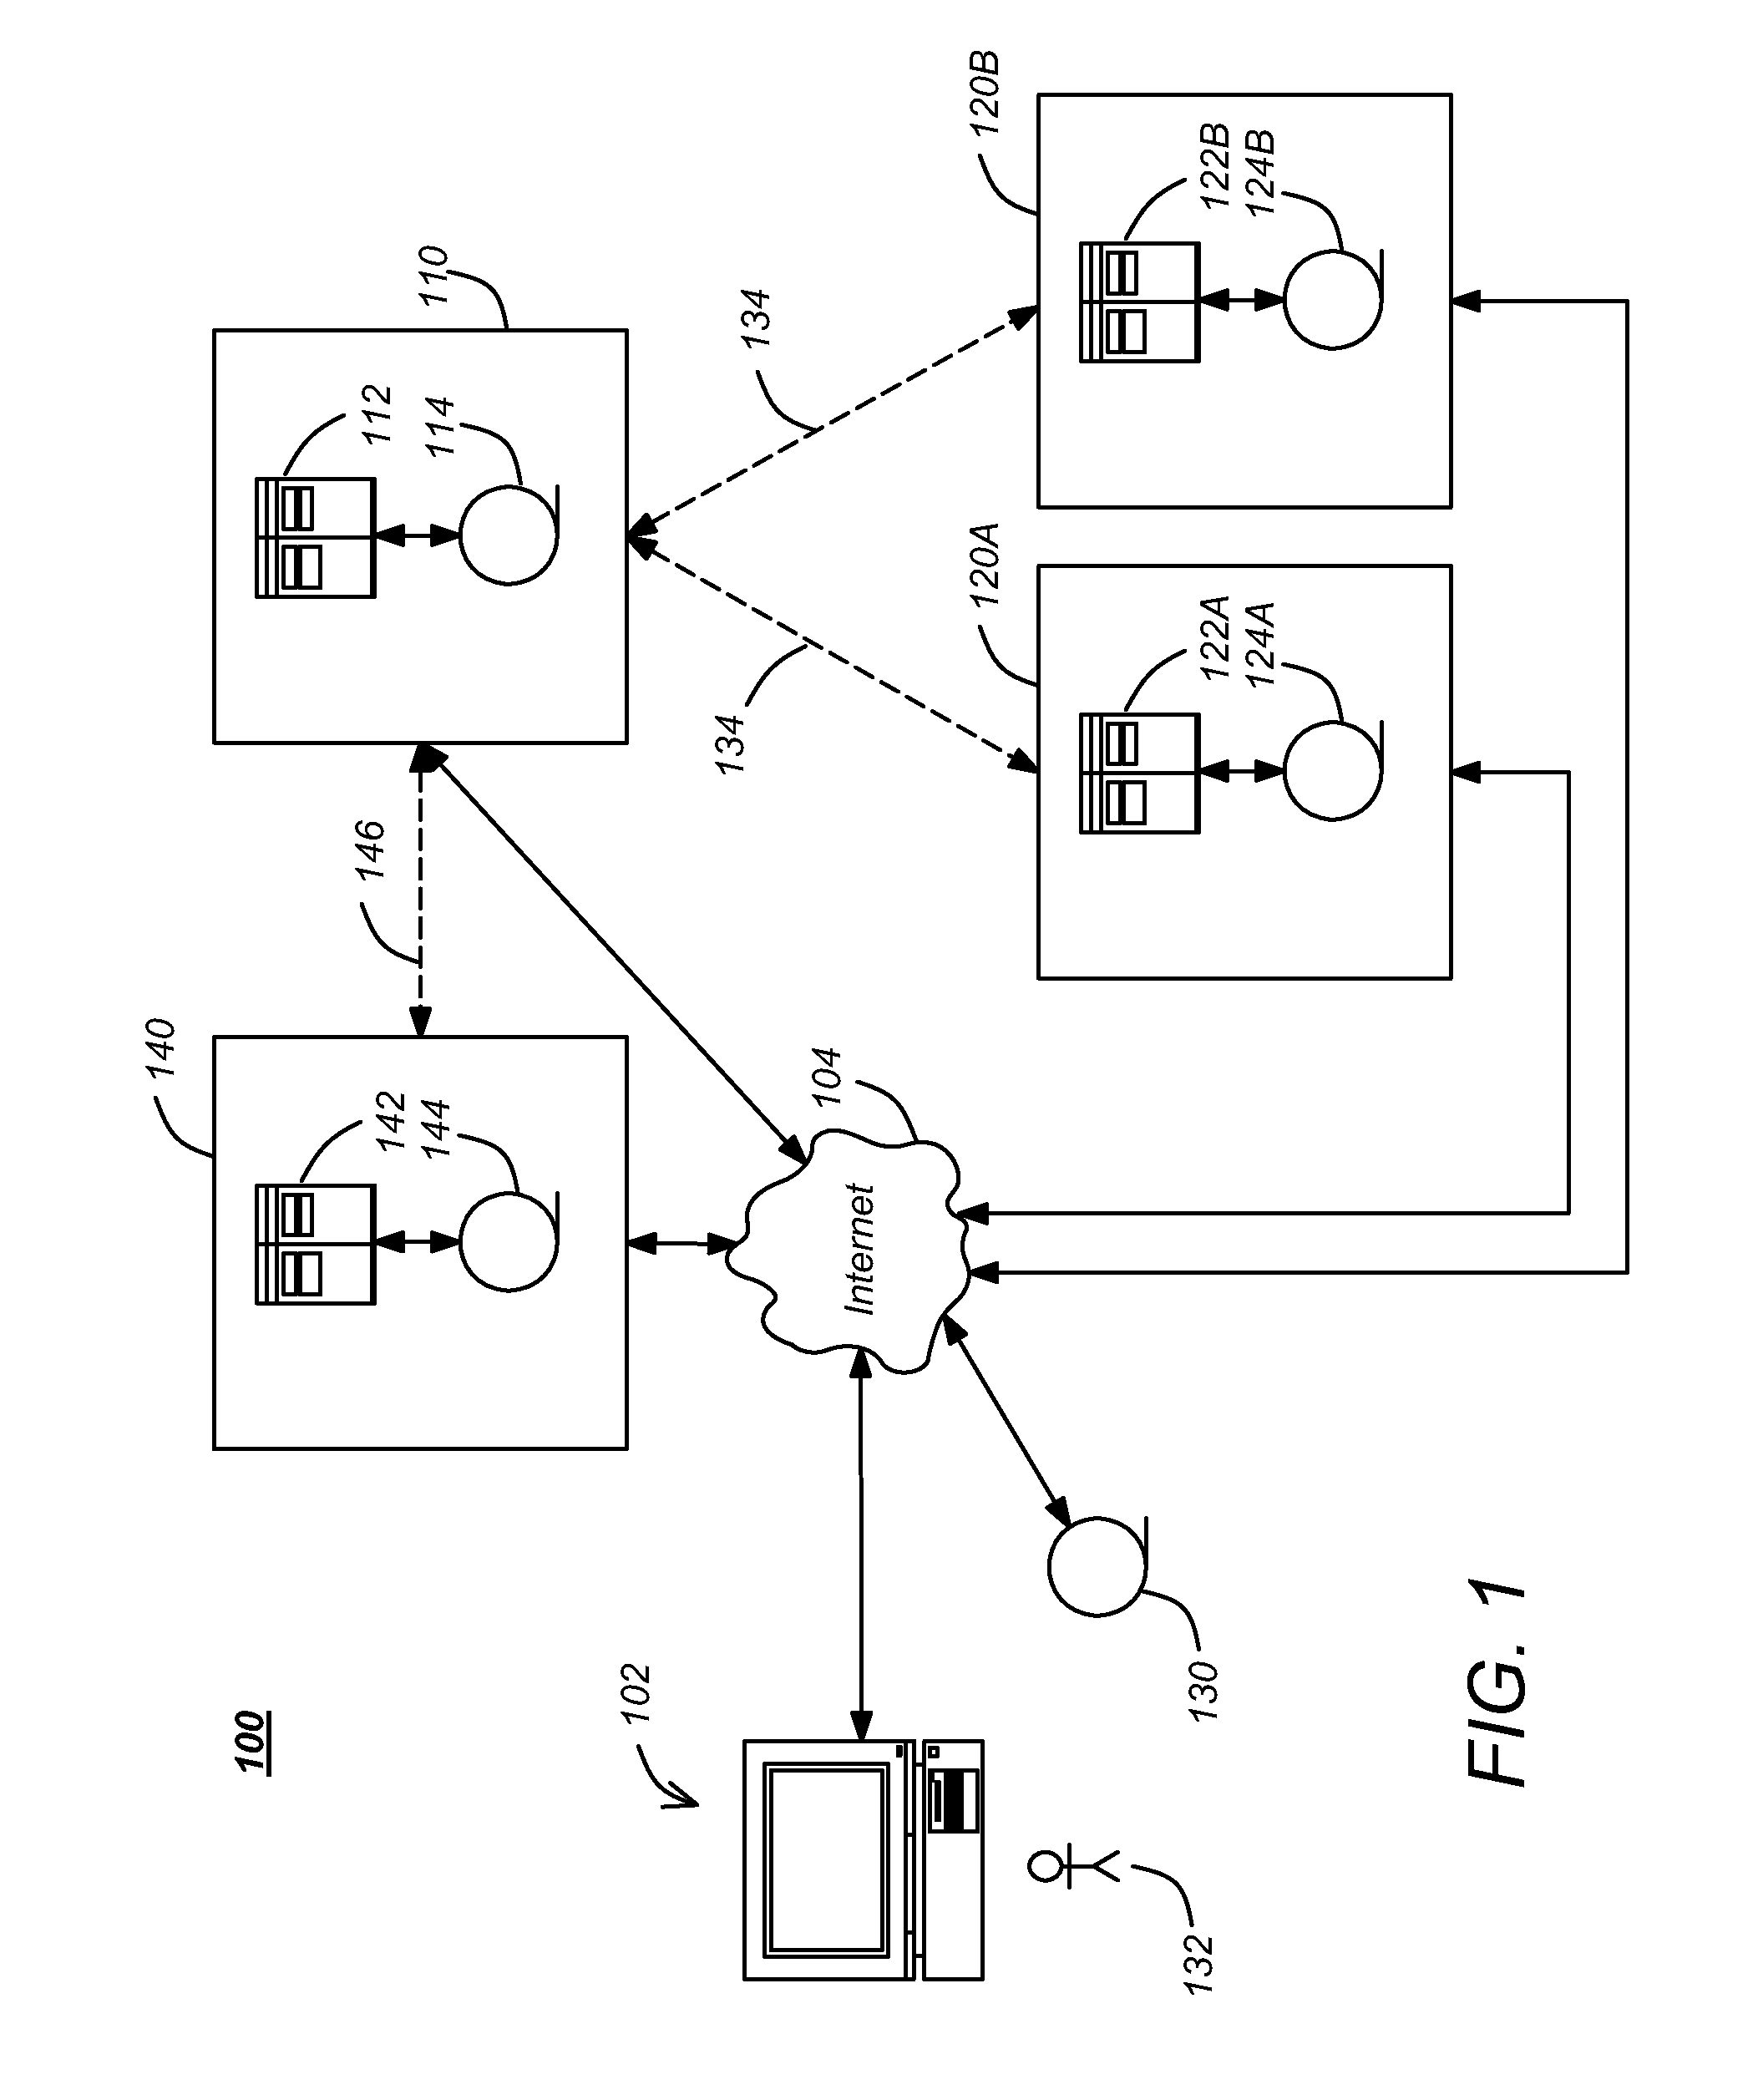 Method and apparatus for rapid and scaleable directed advertisting service